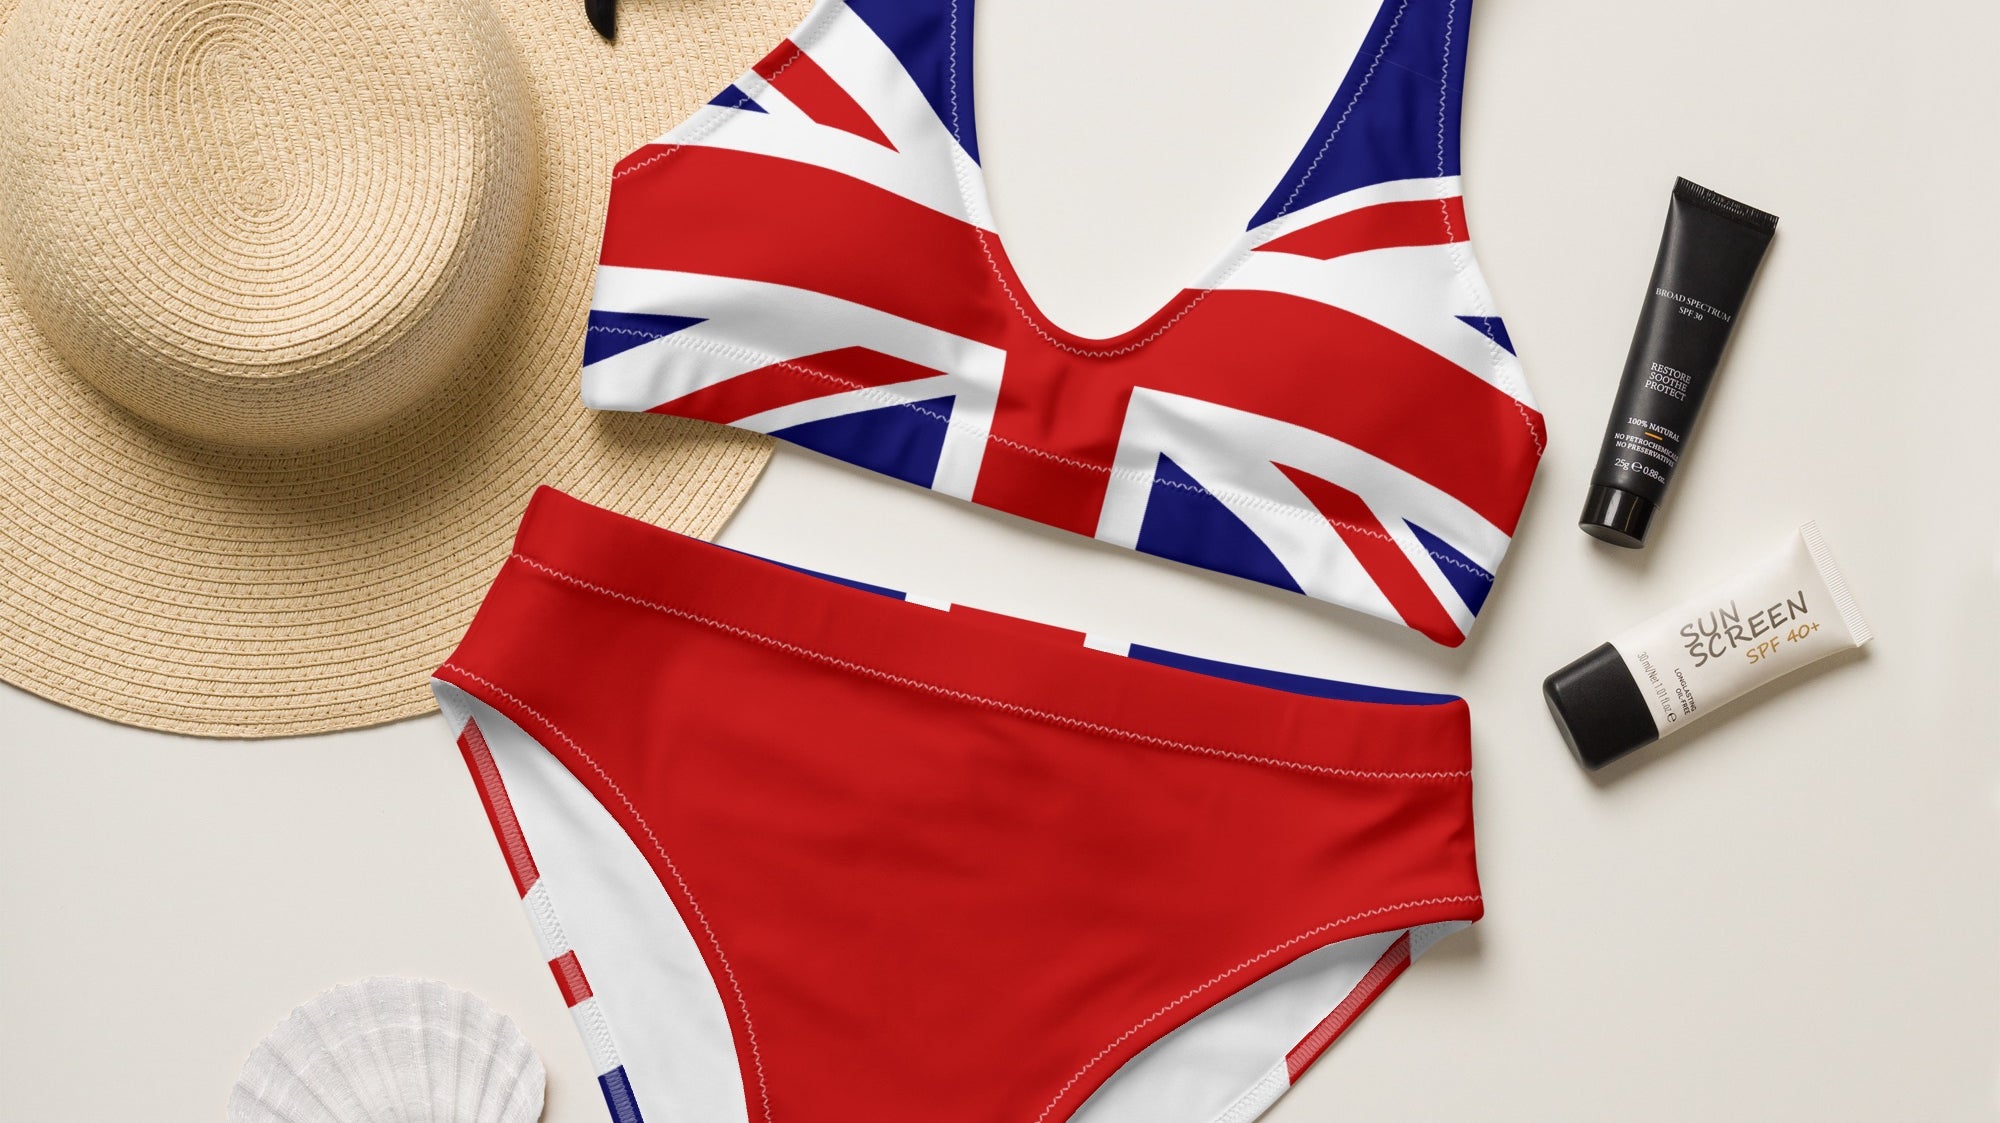 A Brief History of the Union Jack in Fashion